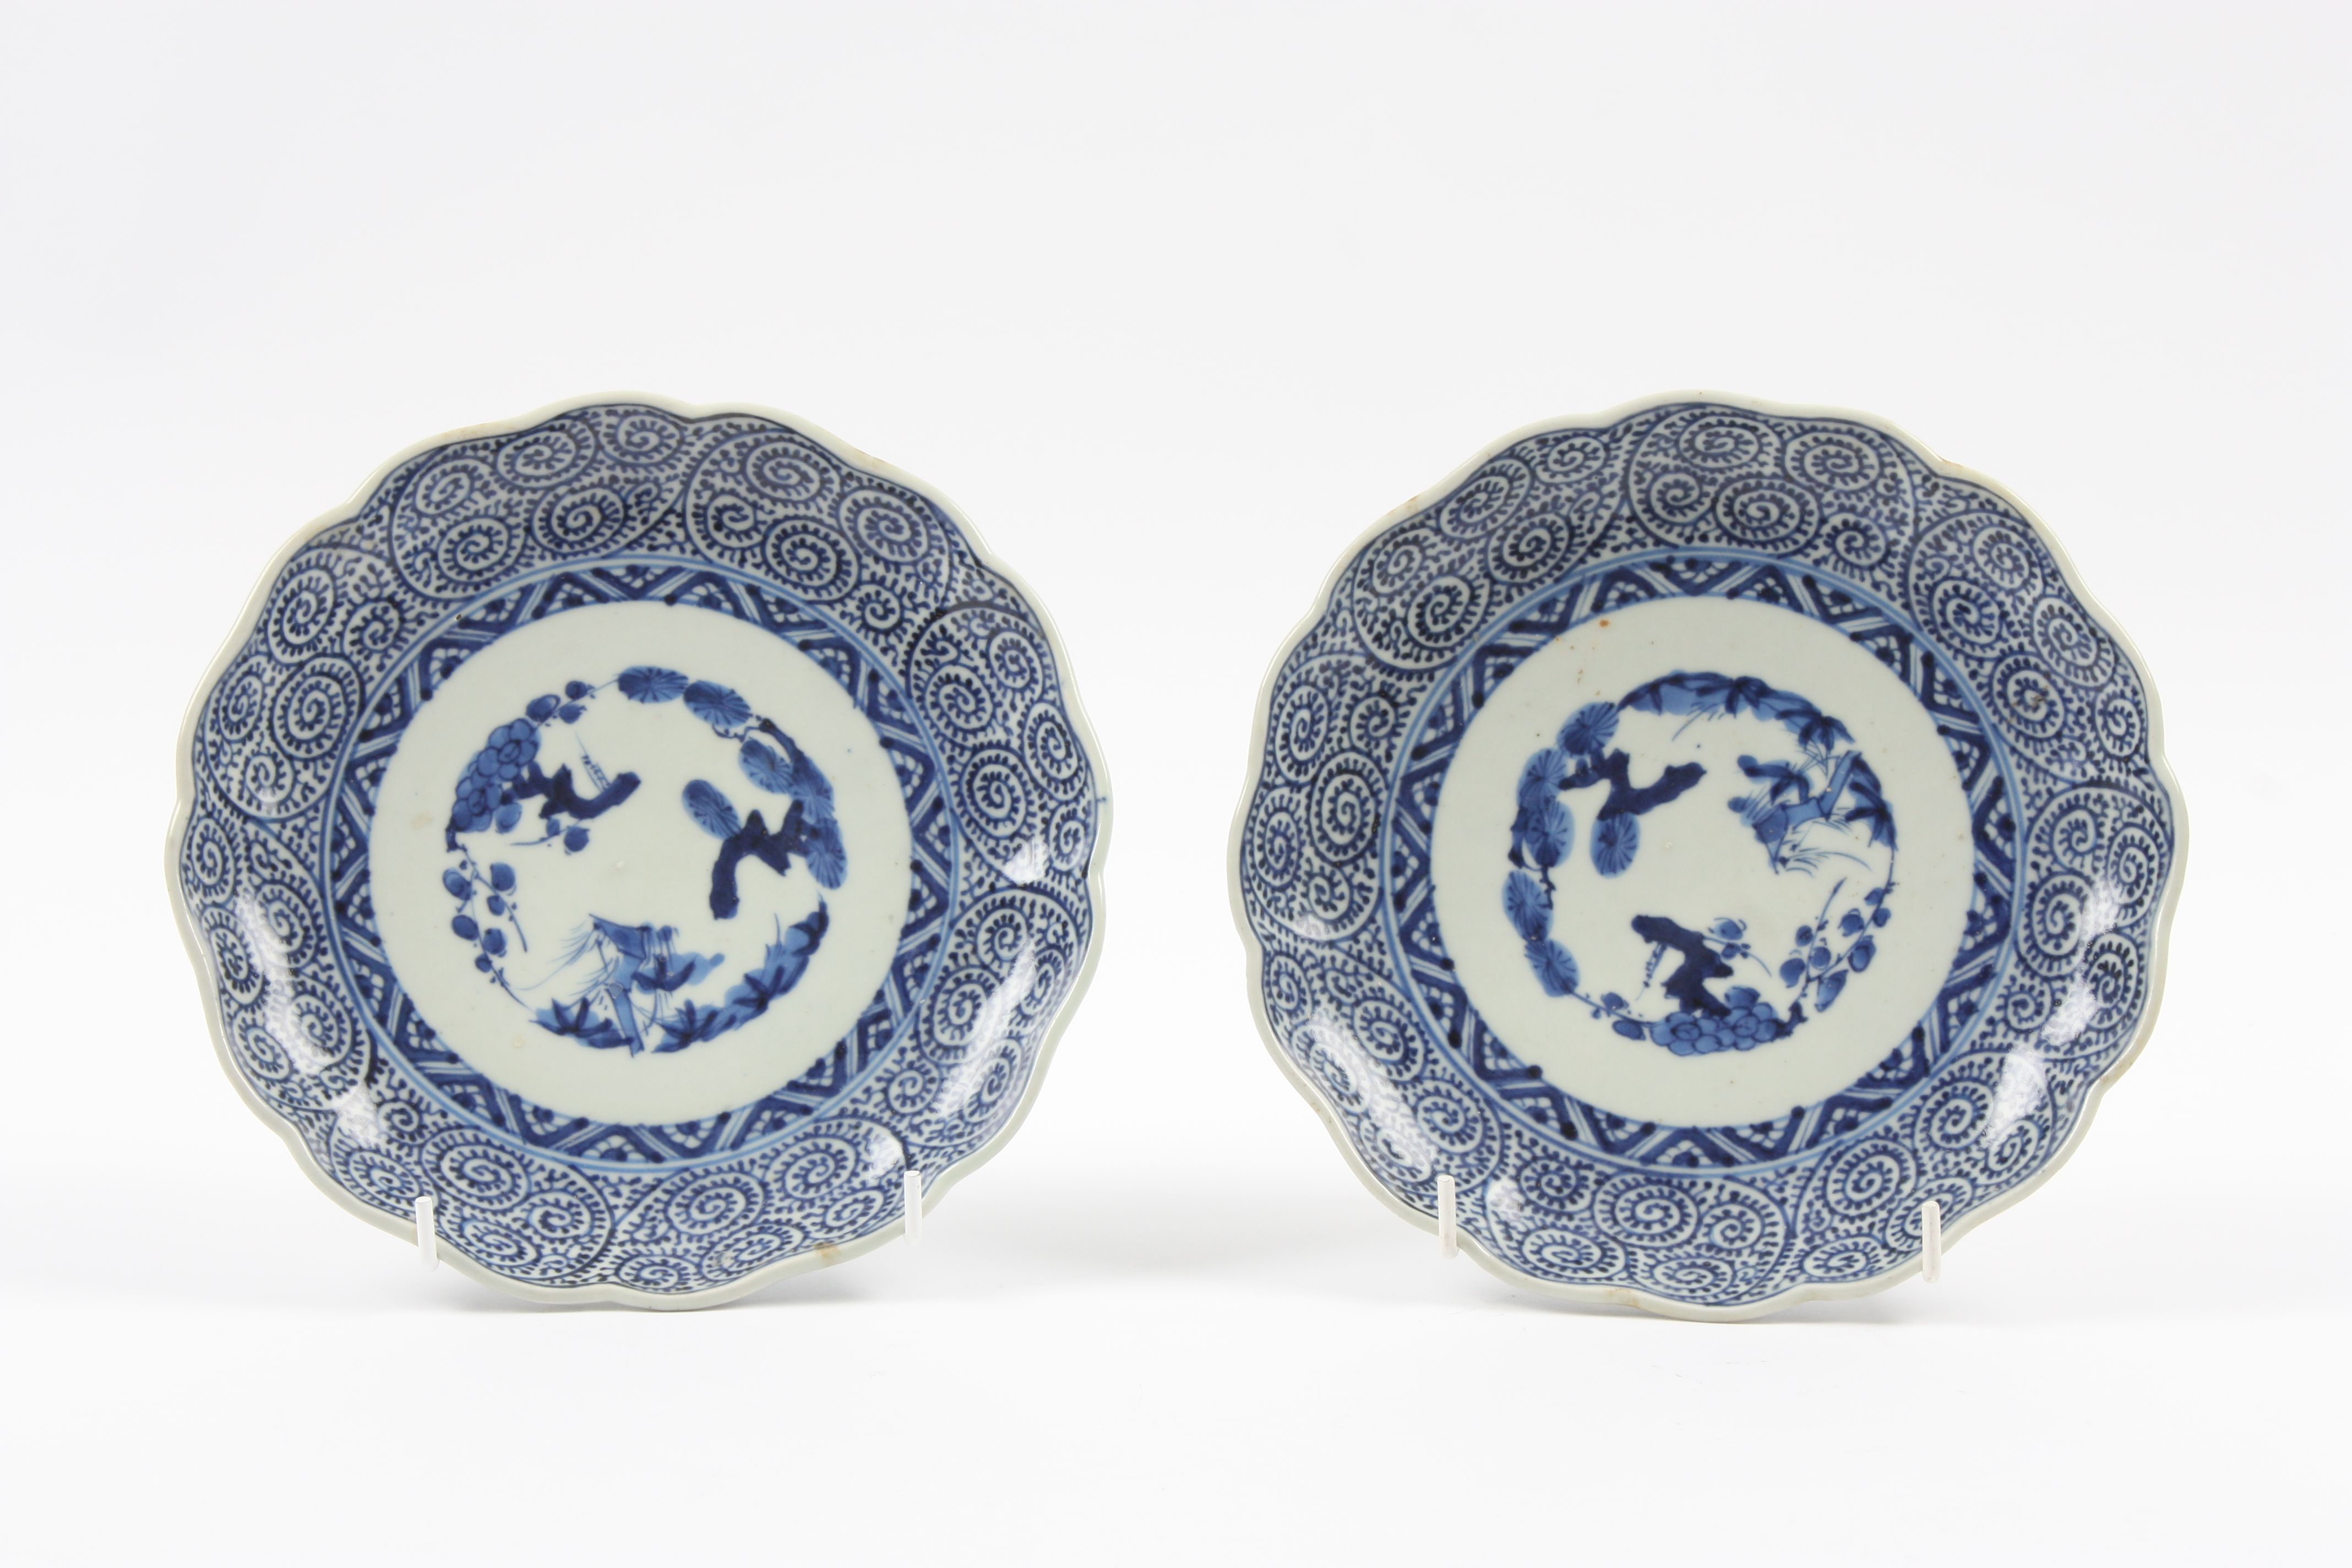 A pair of Chinese late Qing dynasty circular plates with shaped rims, painted with naive landscape